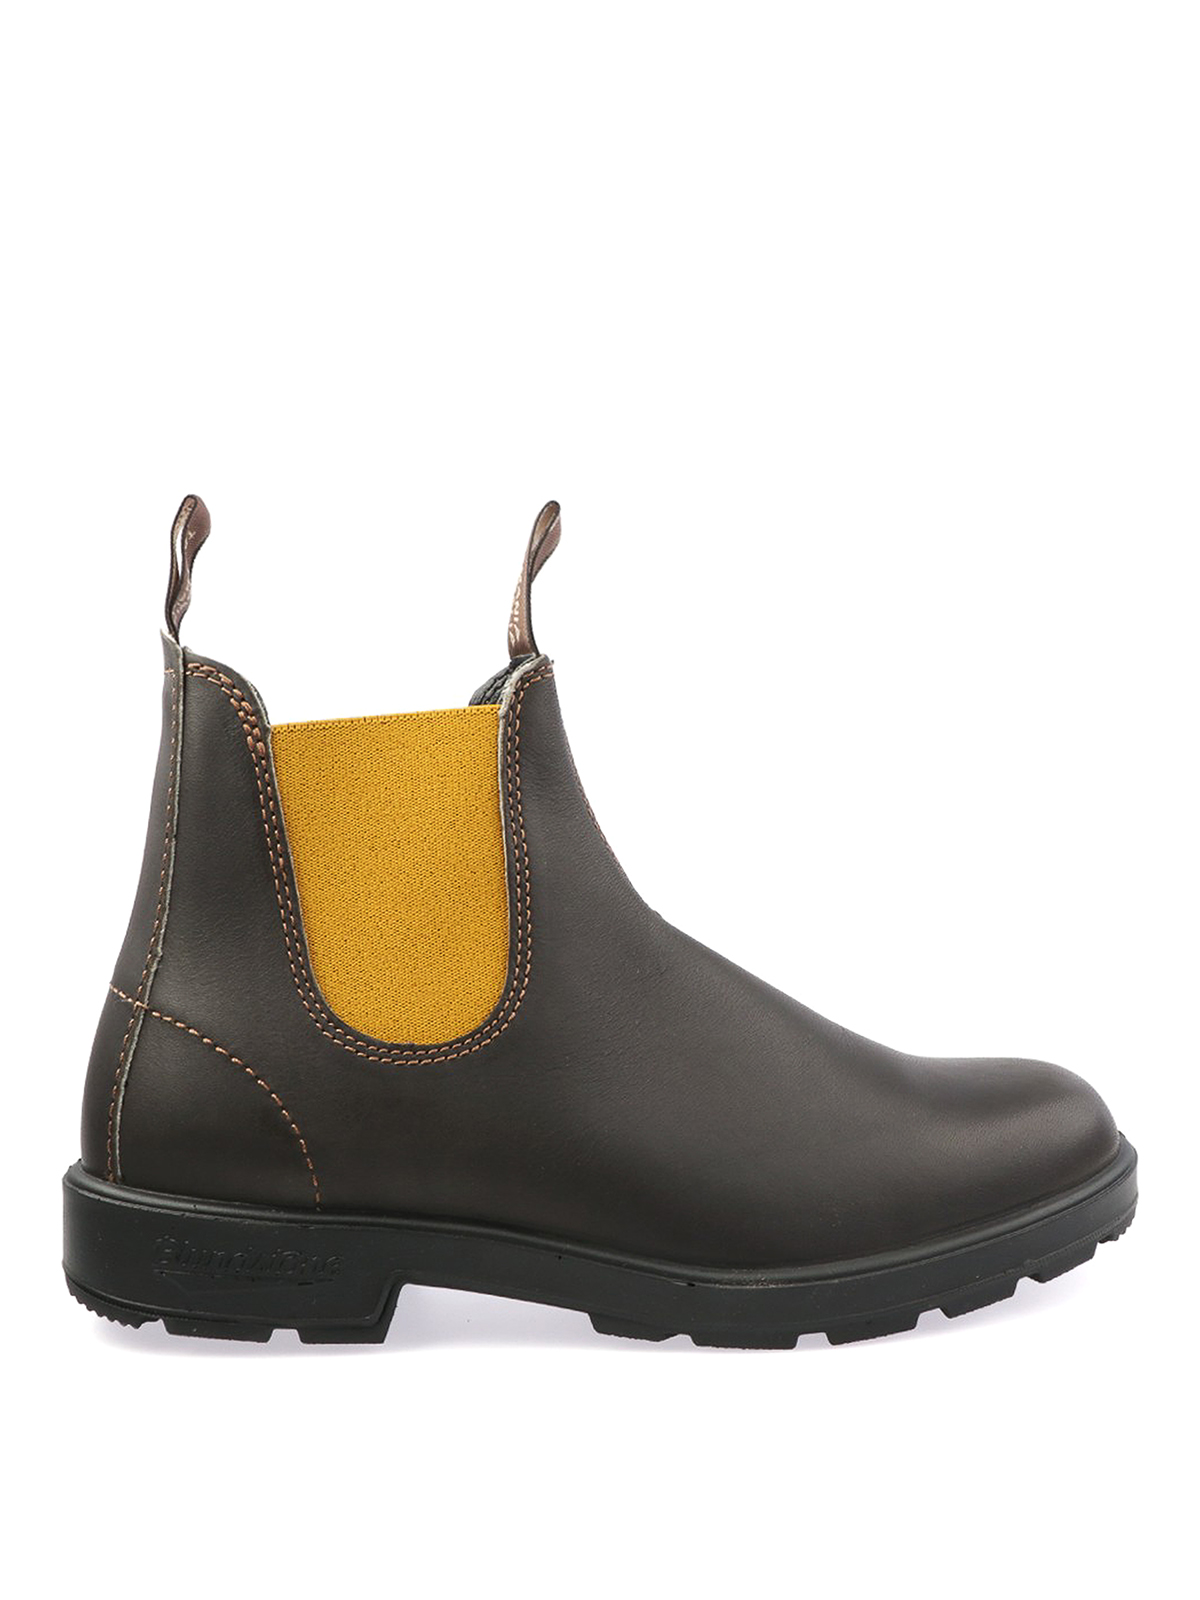 Blundstone Leather Ankle Boots In Marrón Oscuro